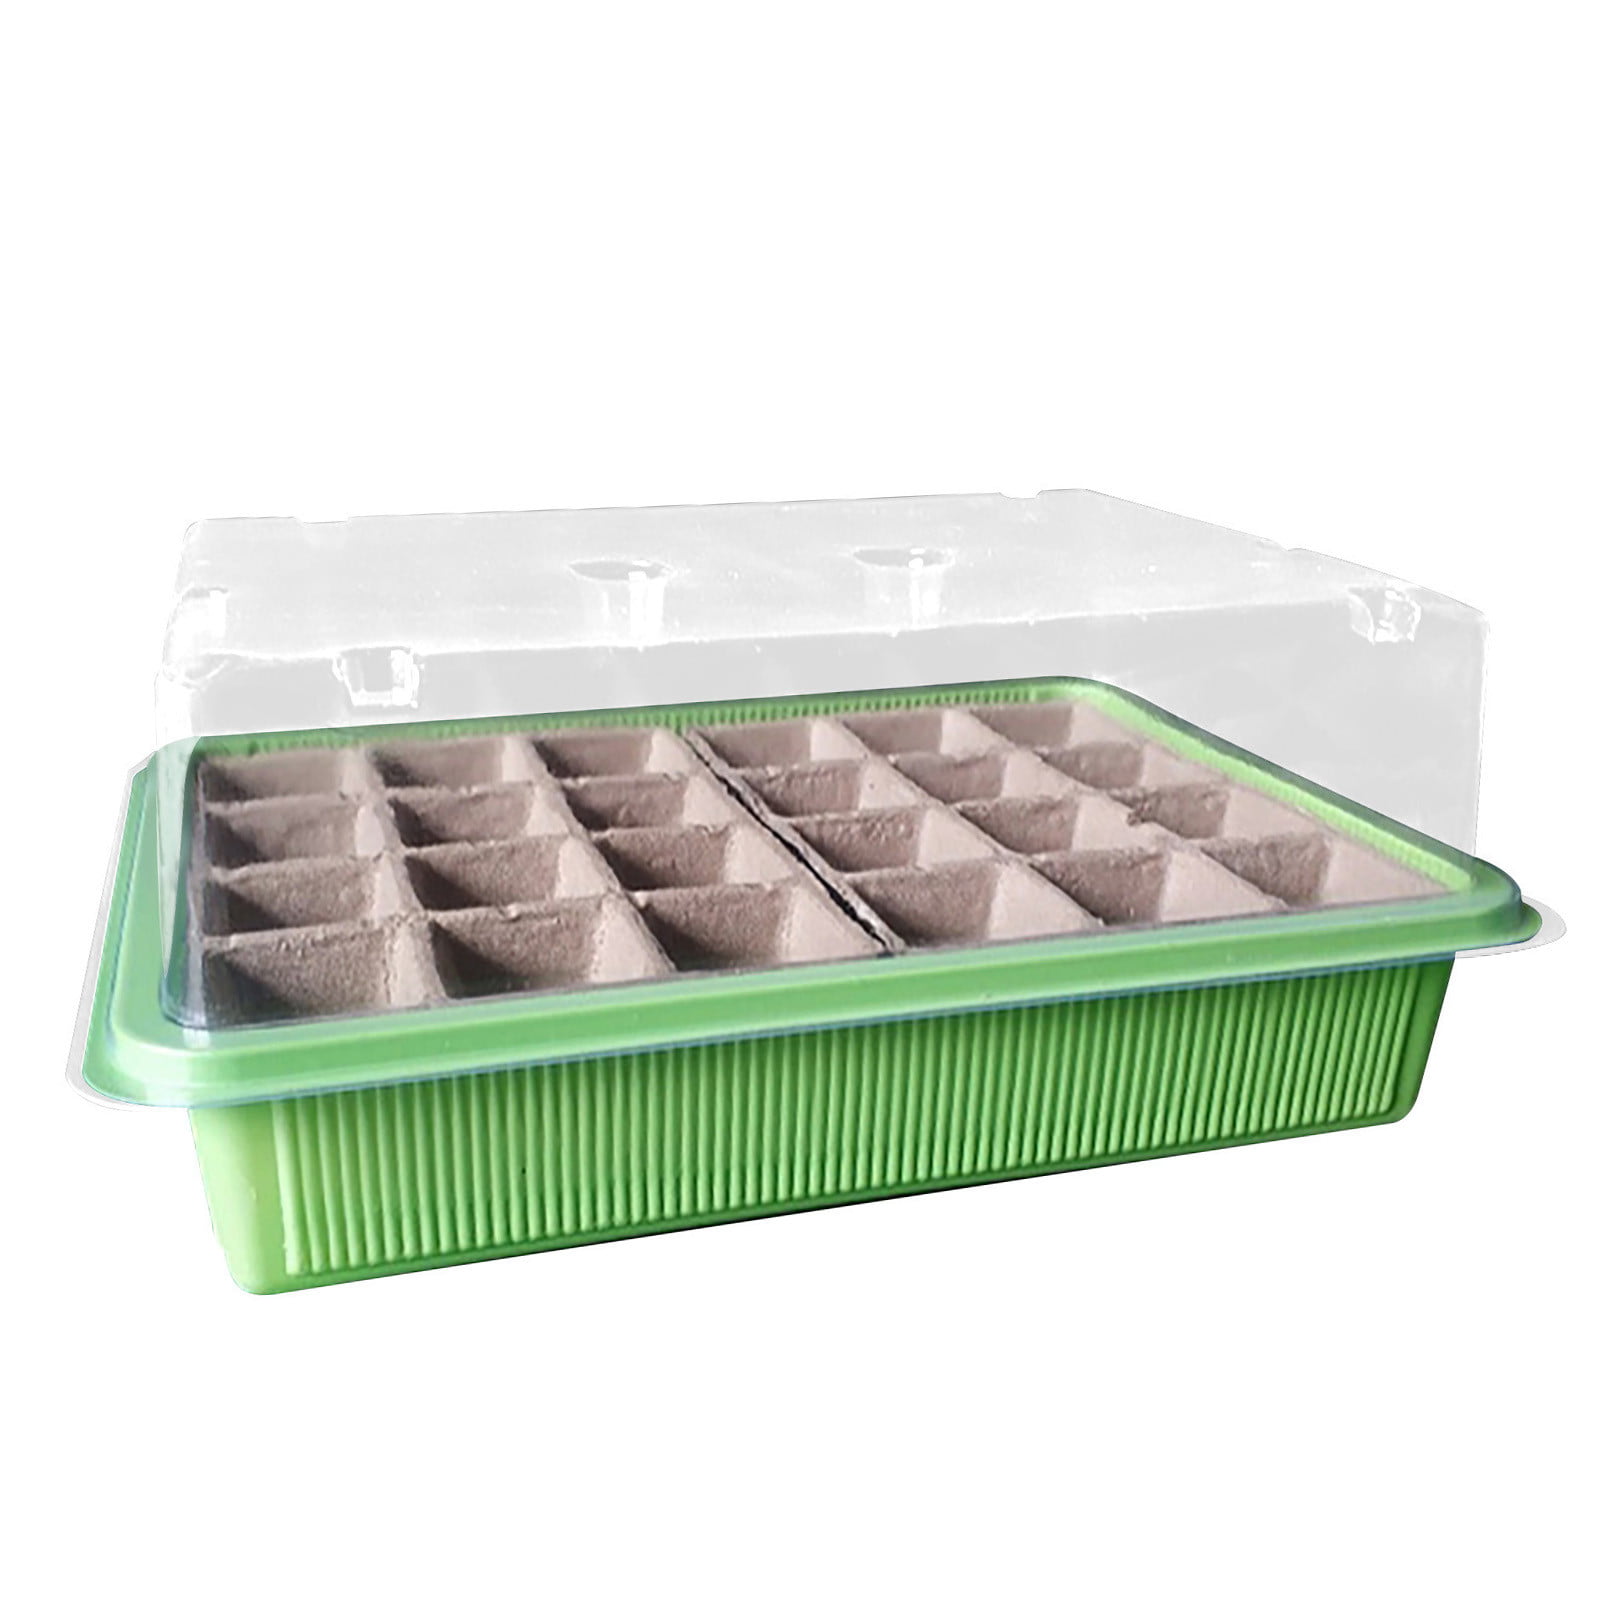 Peat Pots for Seedlings,50 Packs Biodegradable Plant Tray for Vegetable & Flower Seeds REAFOO Seed Starter Kit Organic Seedling Pots with 20 Pcs Plastic Plant Labels